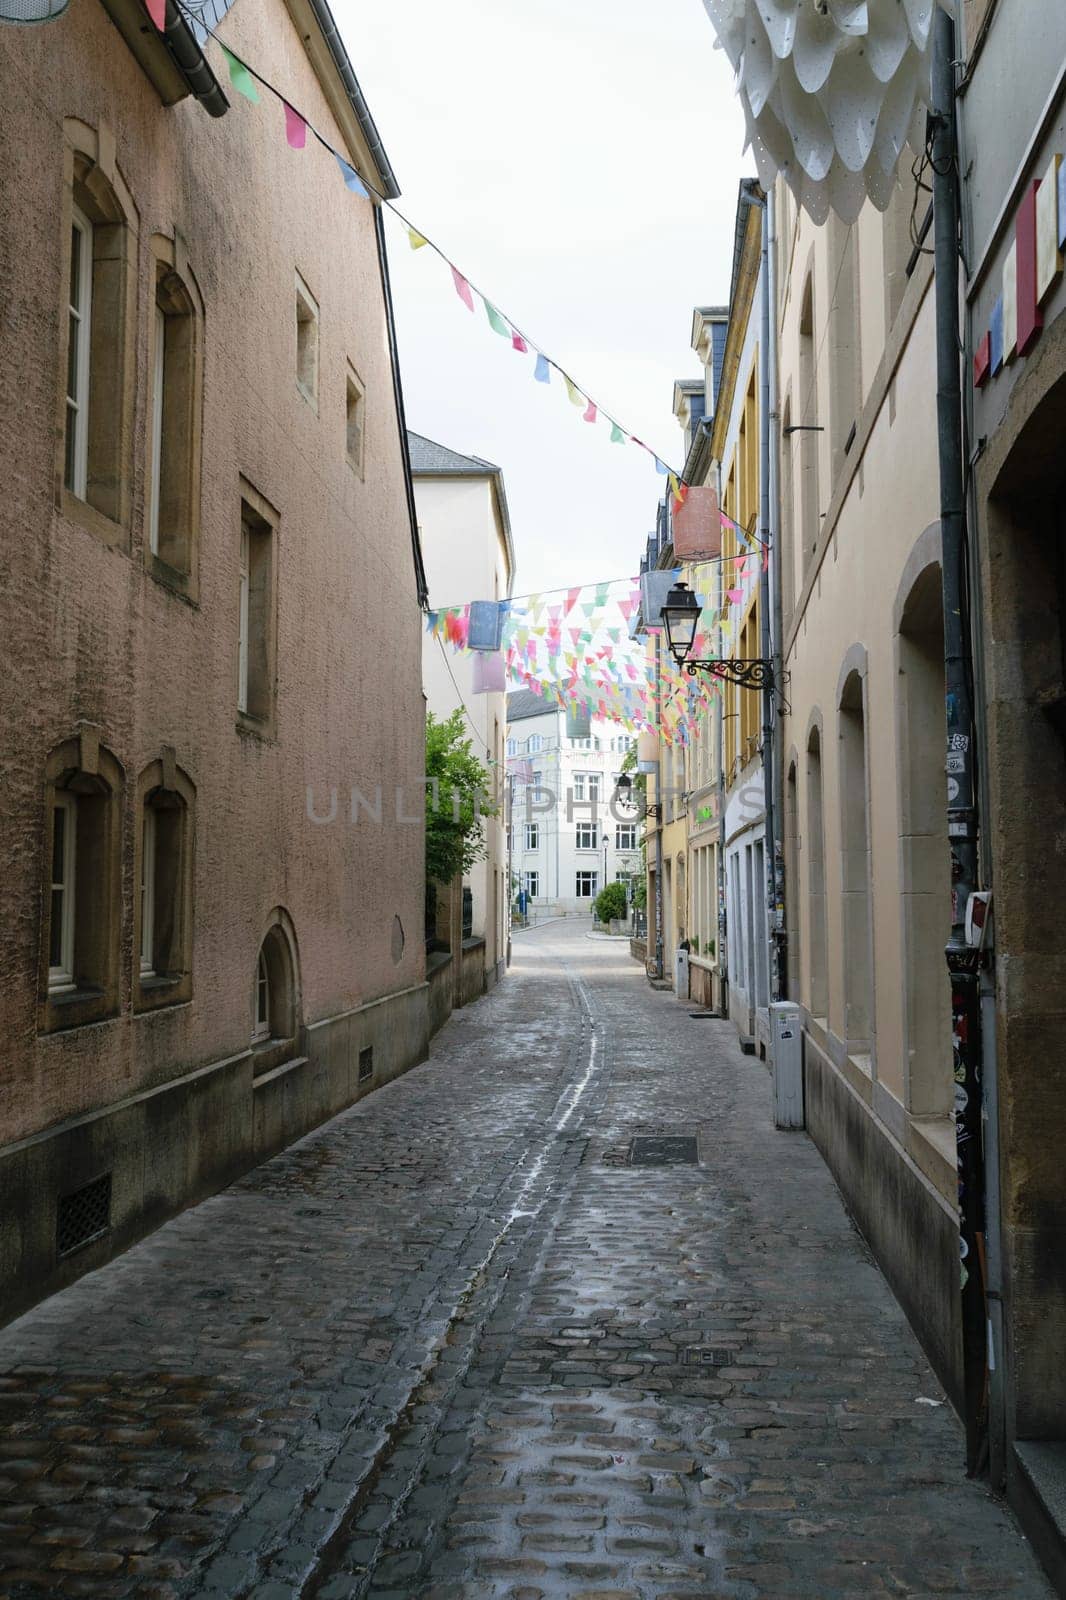 A narrow cobblestone street, adorned with colorful hanging flags. The street is lined with old buildings with arched doorways and windows.